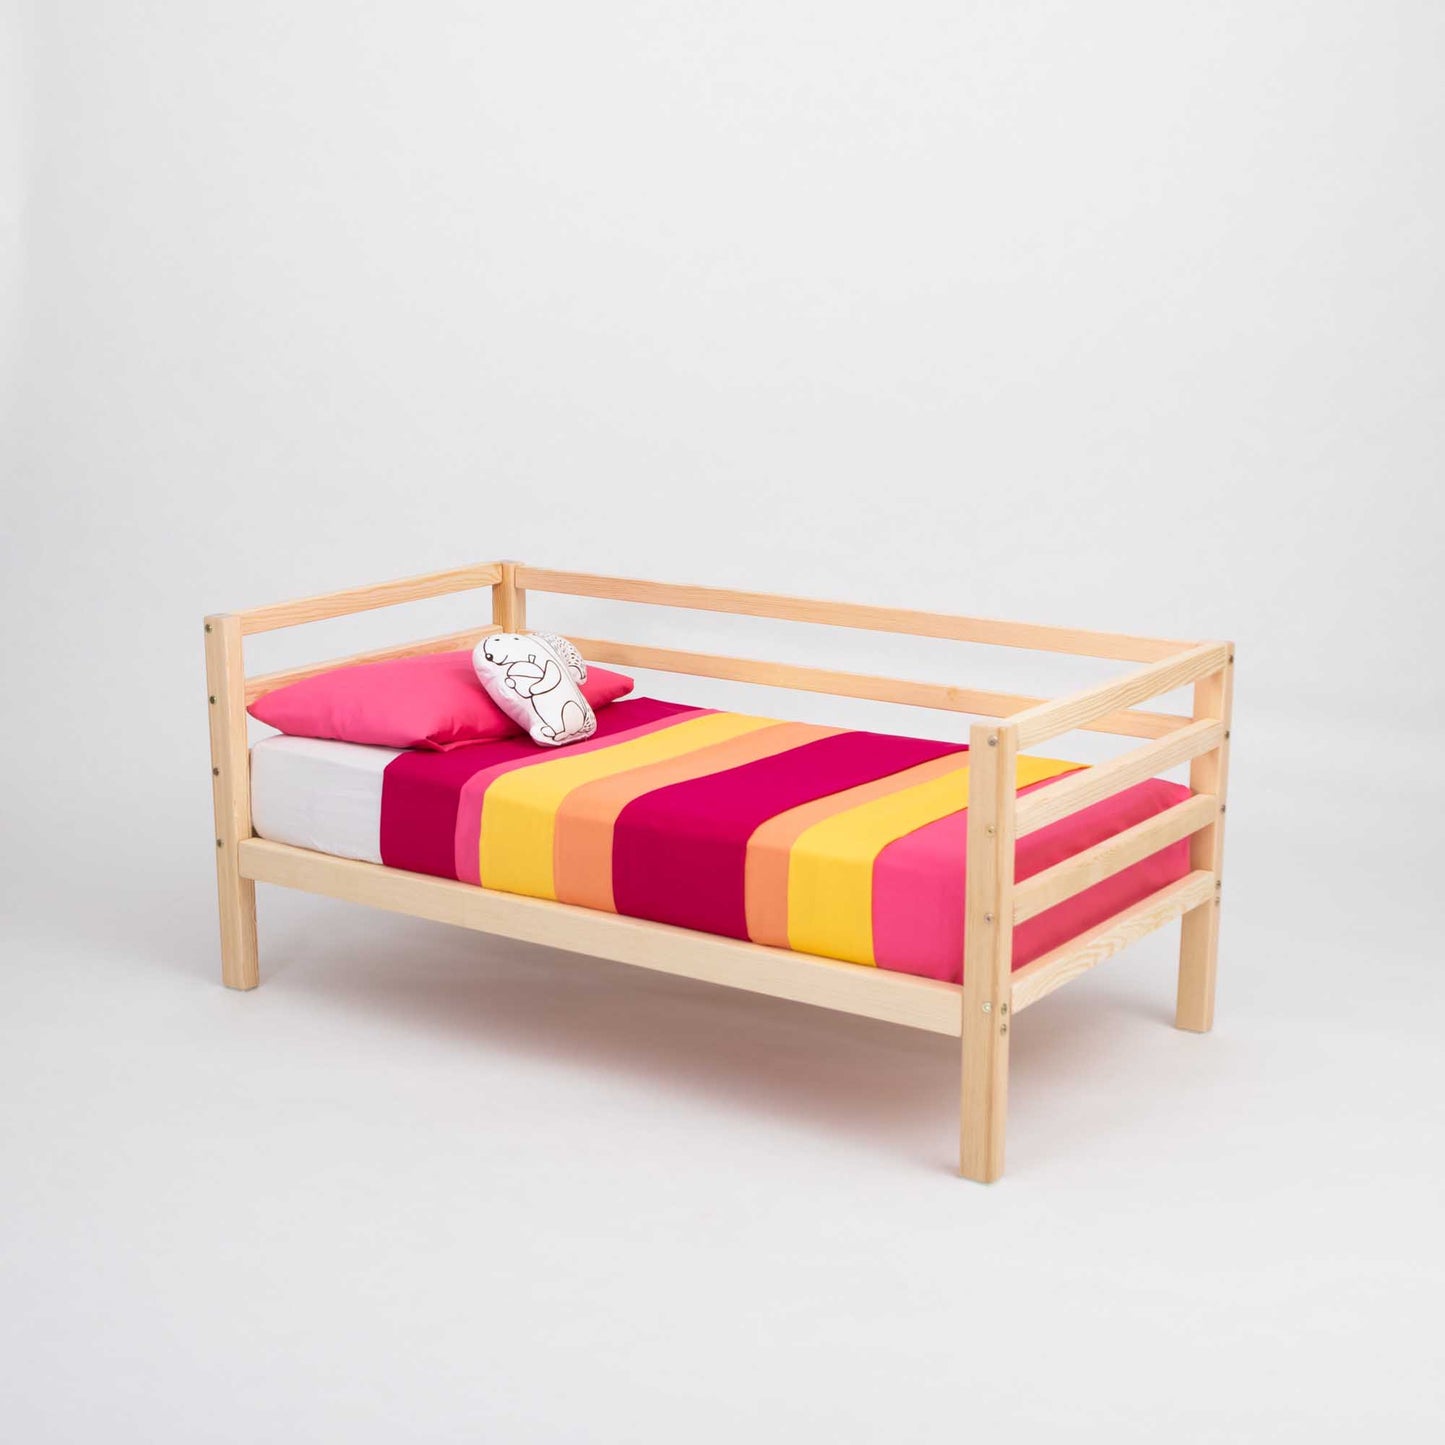 A child's bed featuring a 2-in-1 transformable design with a Sweet Home From Wood brand's 3-sided horizontal rail, and adorned with a colorful striped blanket.